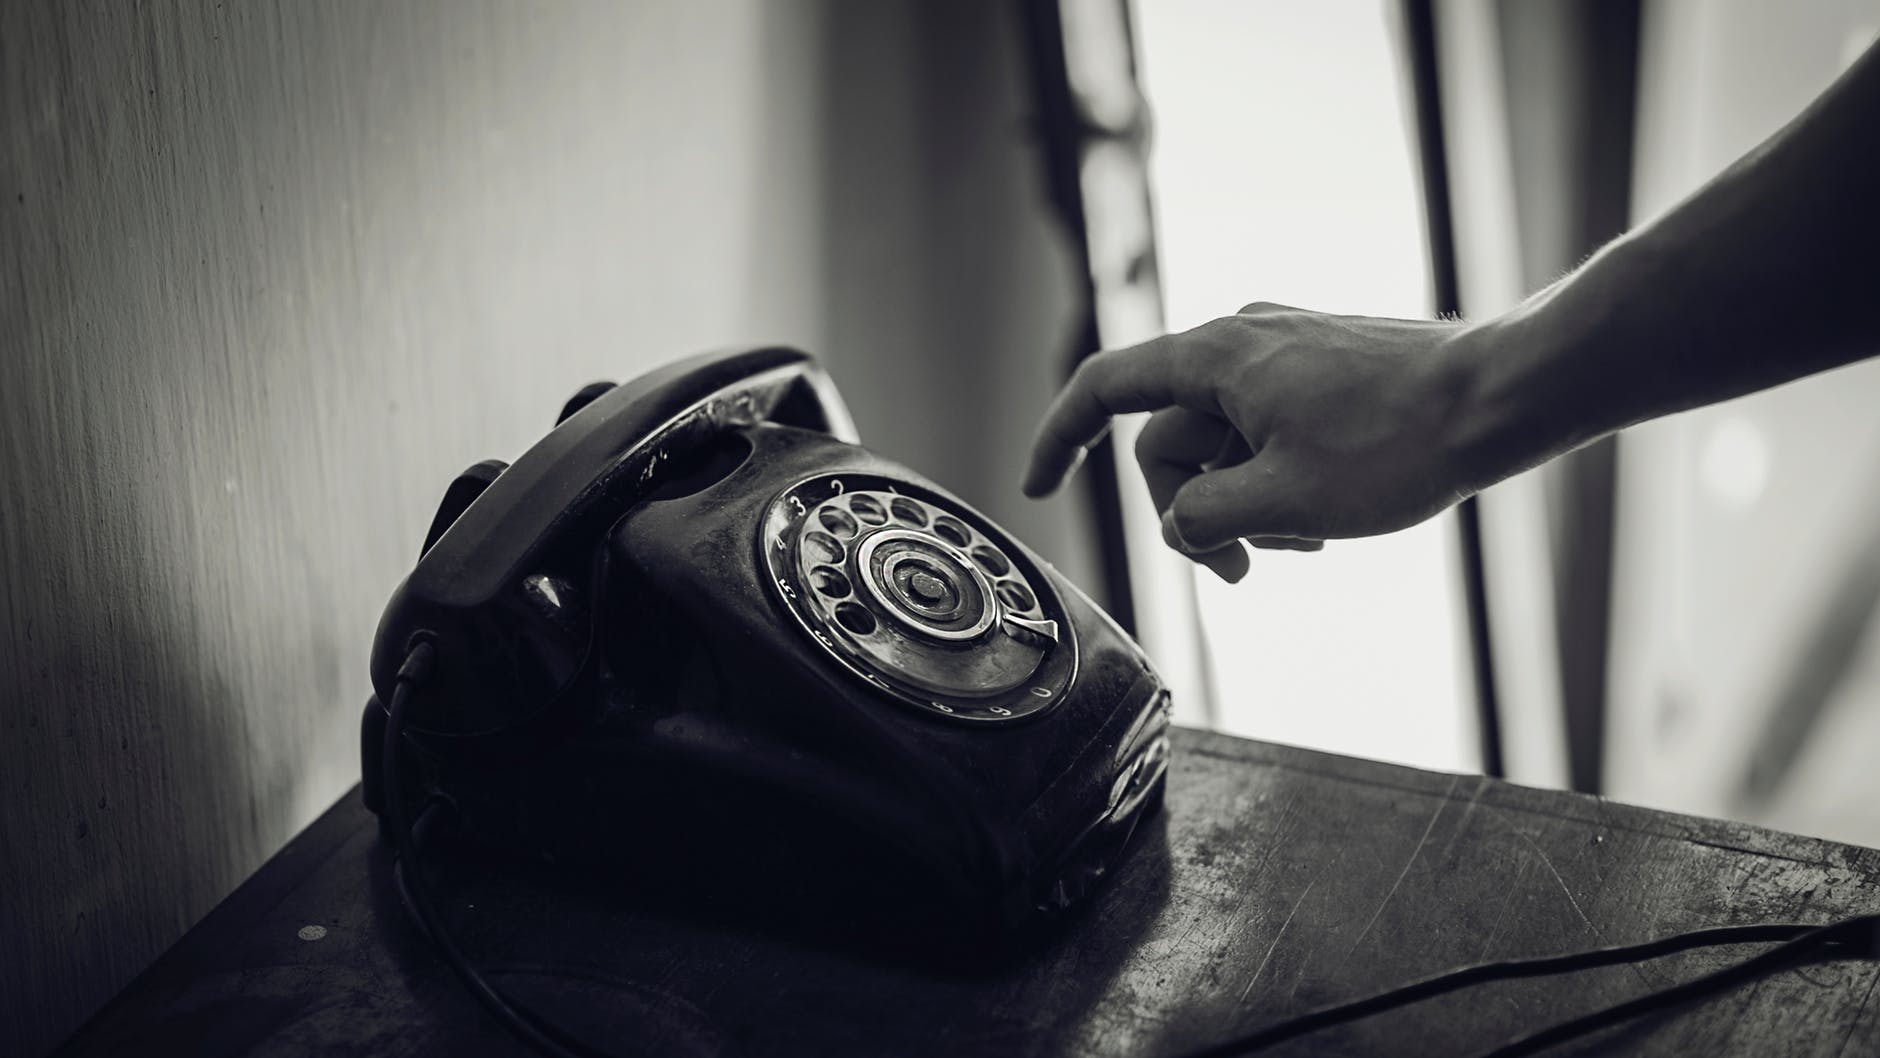 Grayscale Photo of Rotary Telephone Beside Person Hand, Grayscale Photo of Rotary Telephone Beside Person Hand